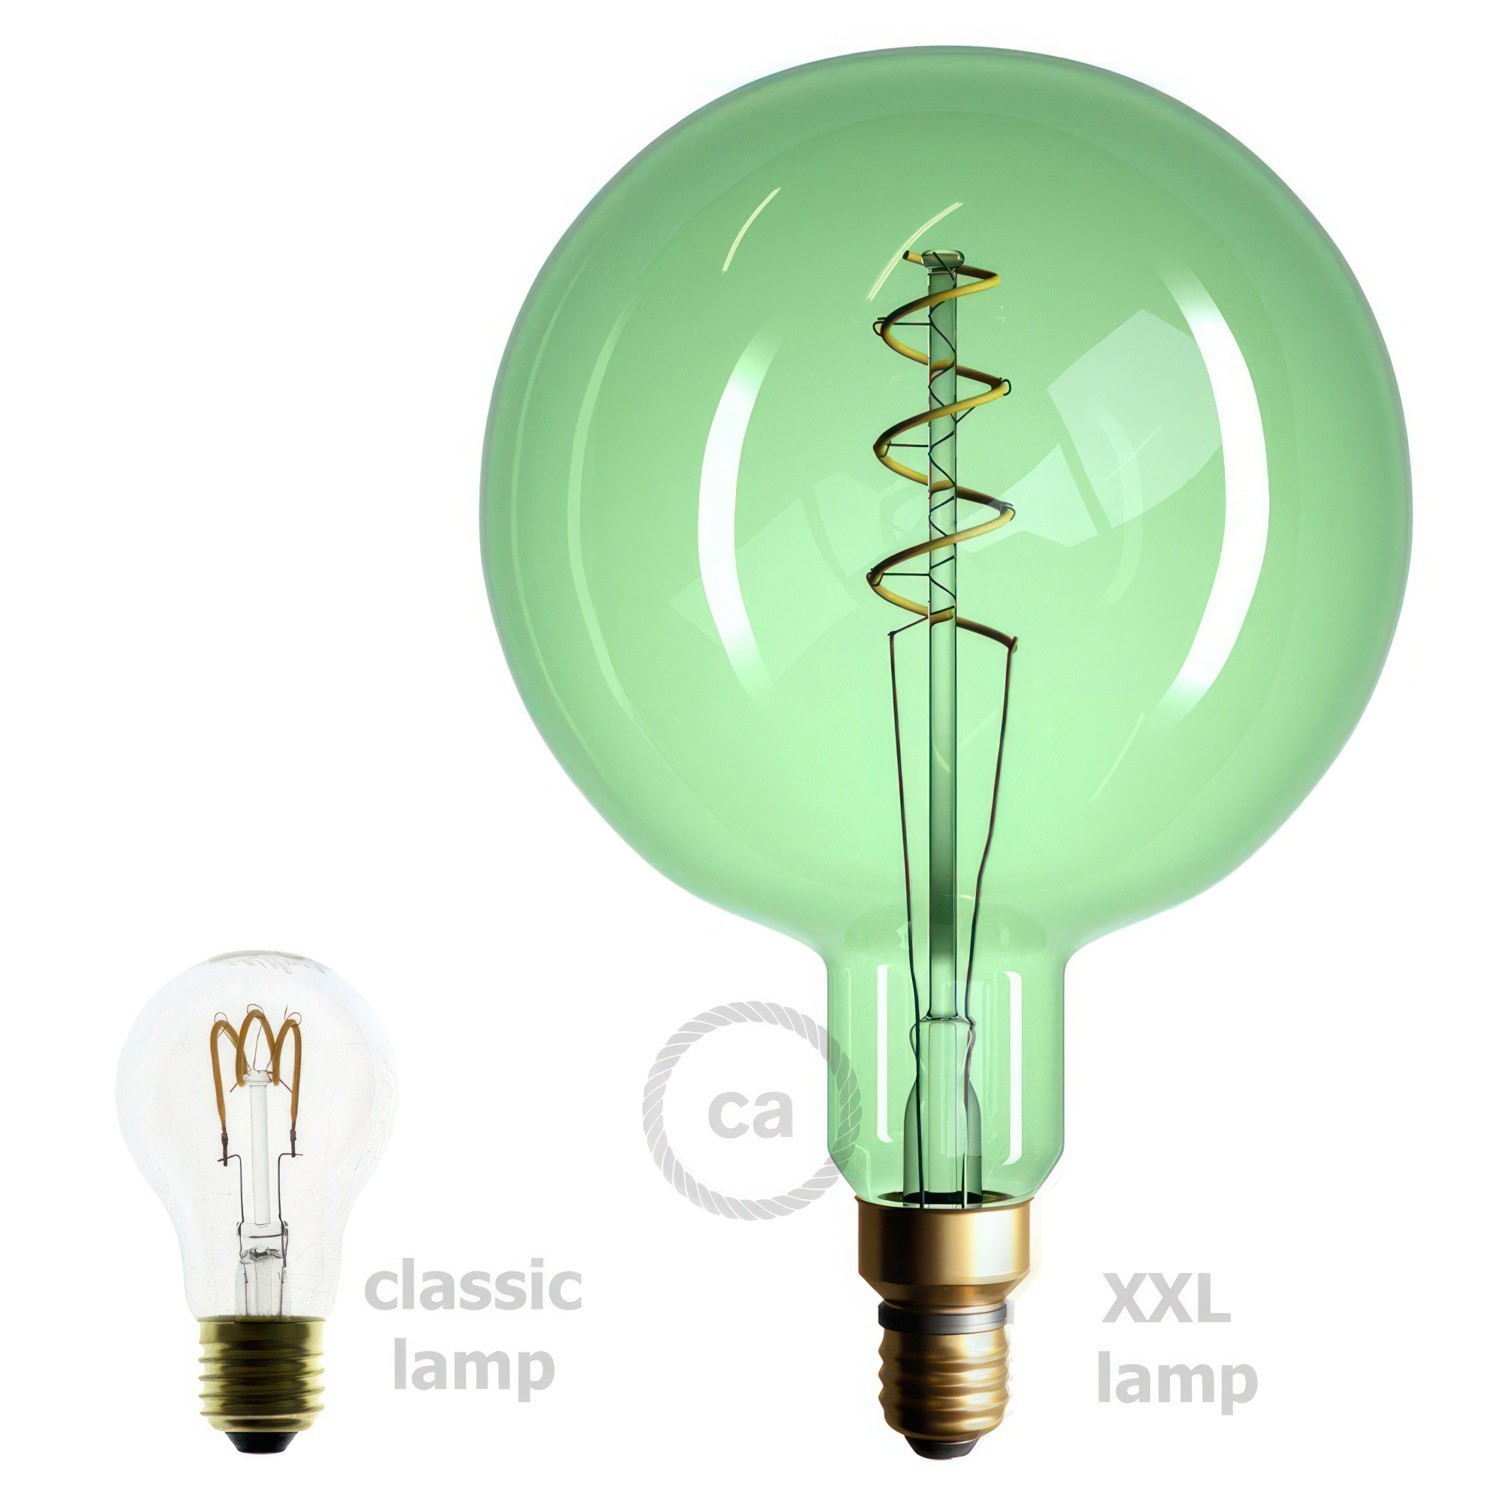 XXL LED Emerald Light Bulb - Sphere G200 Curved Spiral Filament - 5W 280Lm E27 2200K Dimmable